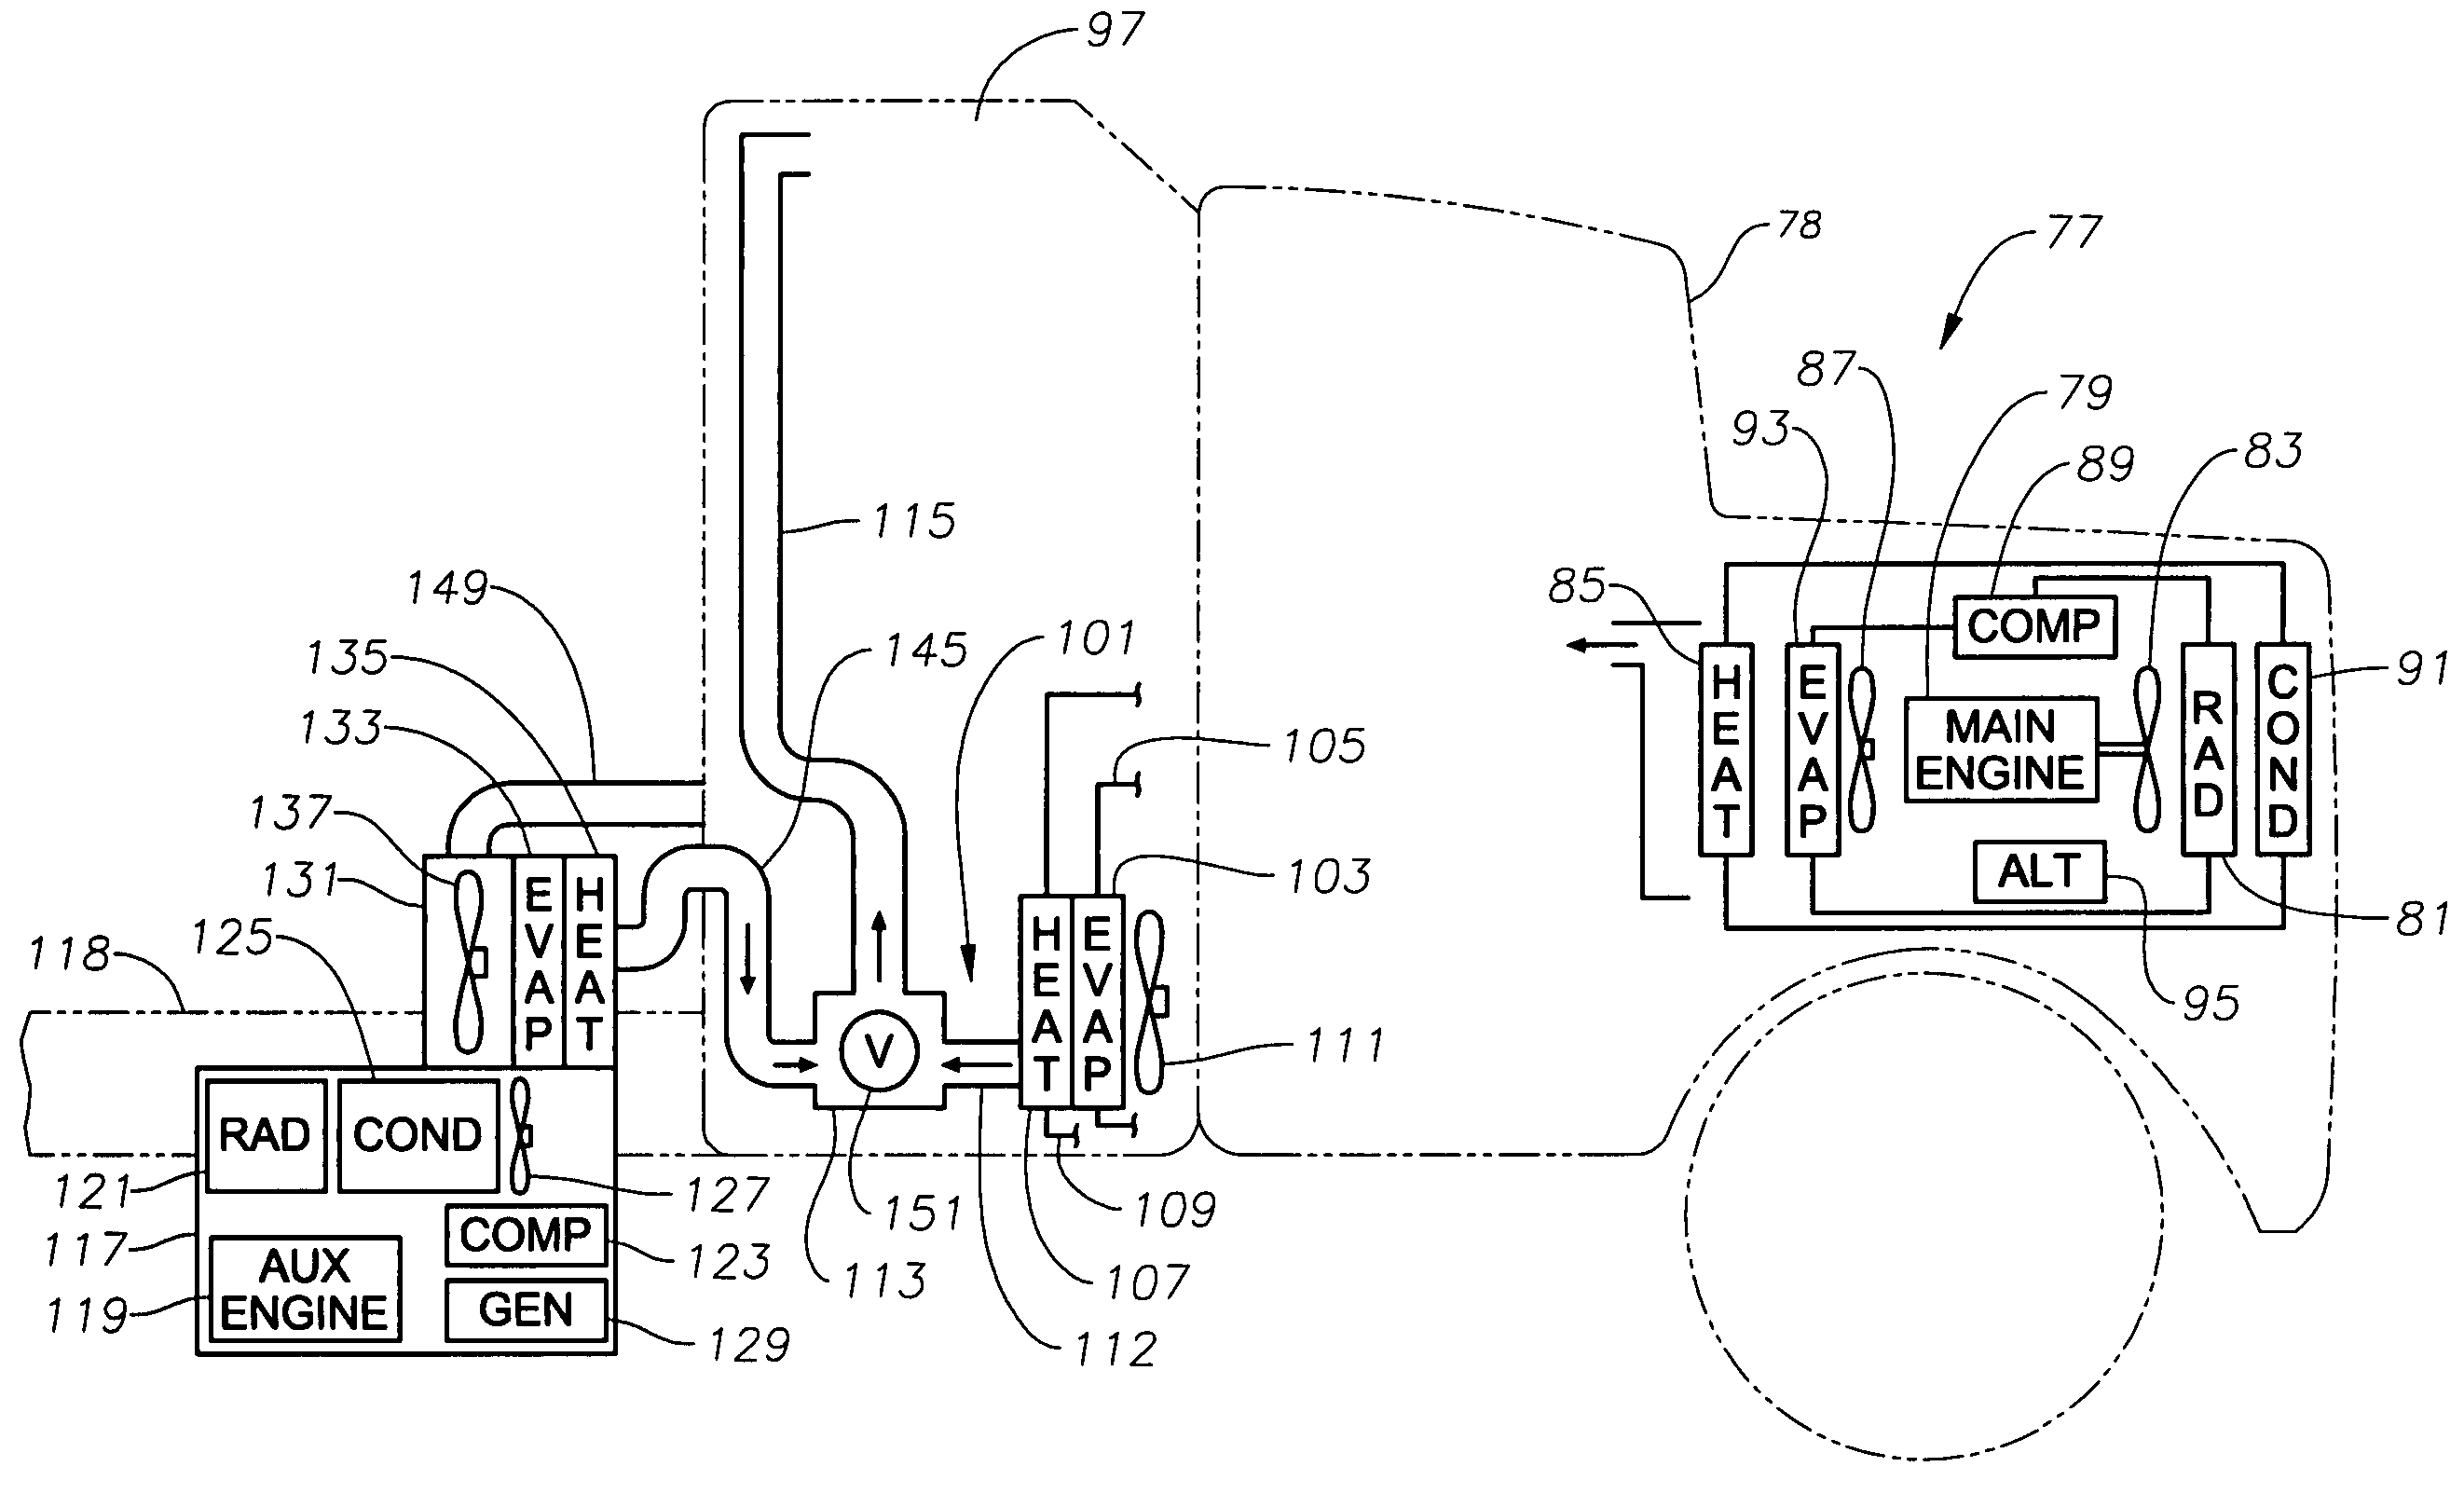 Vehicle heating and cooling system